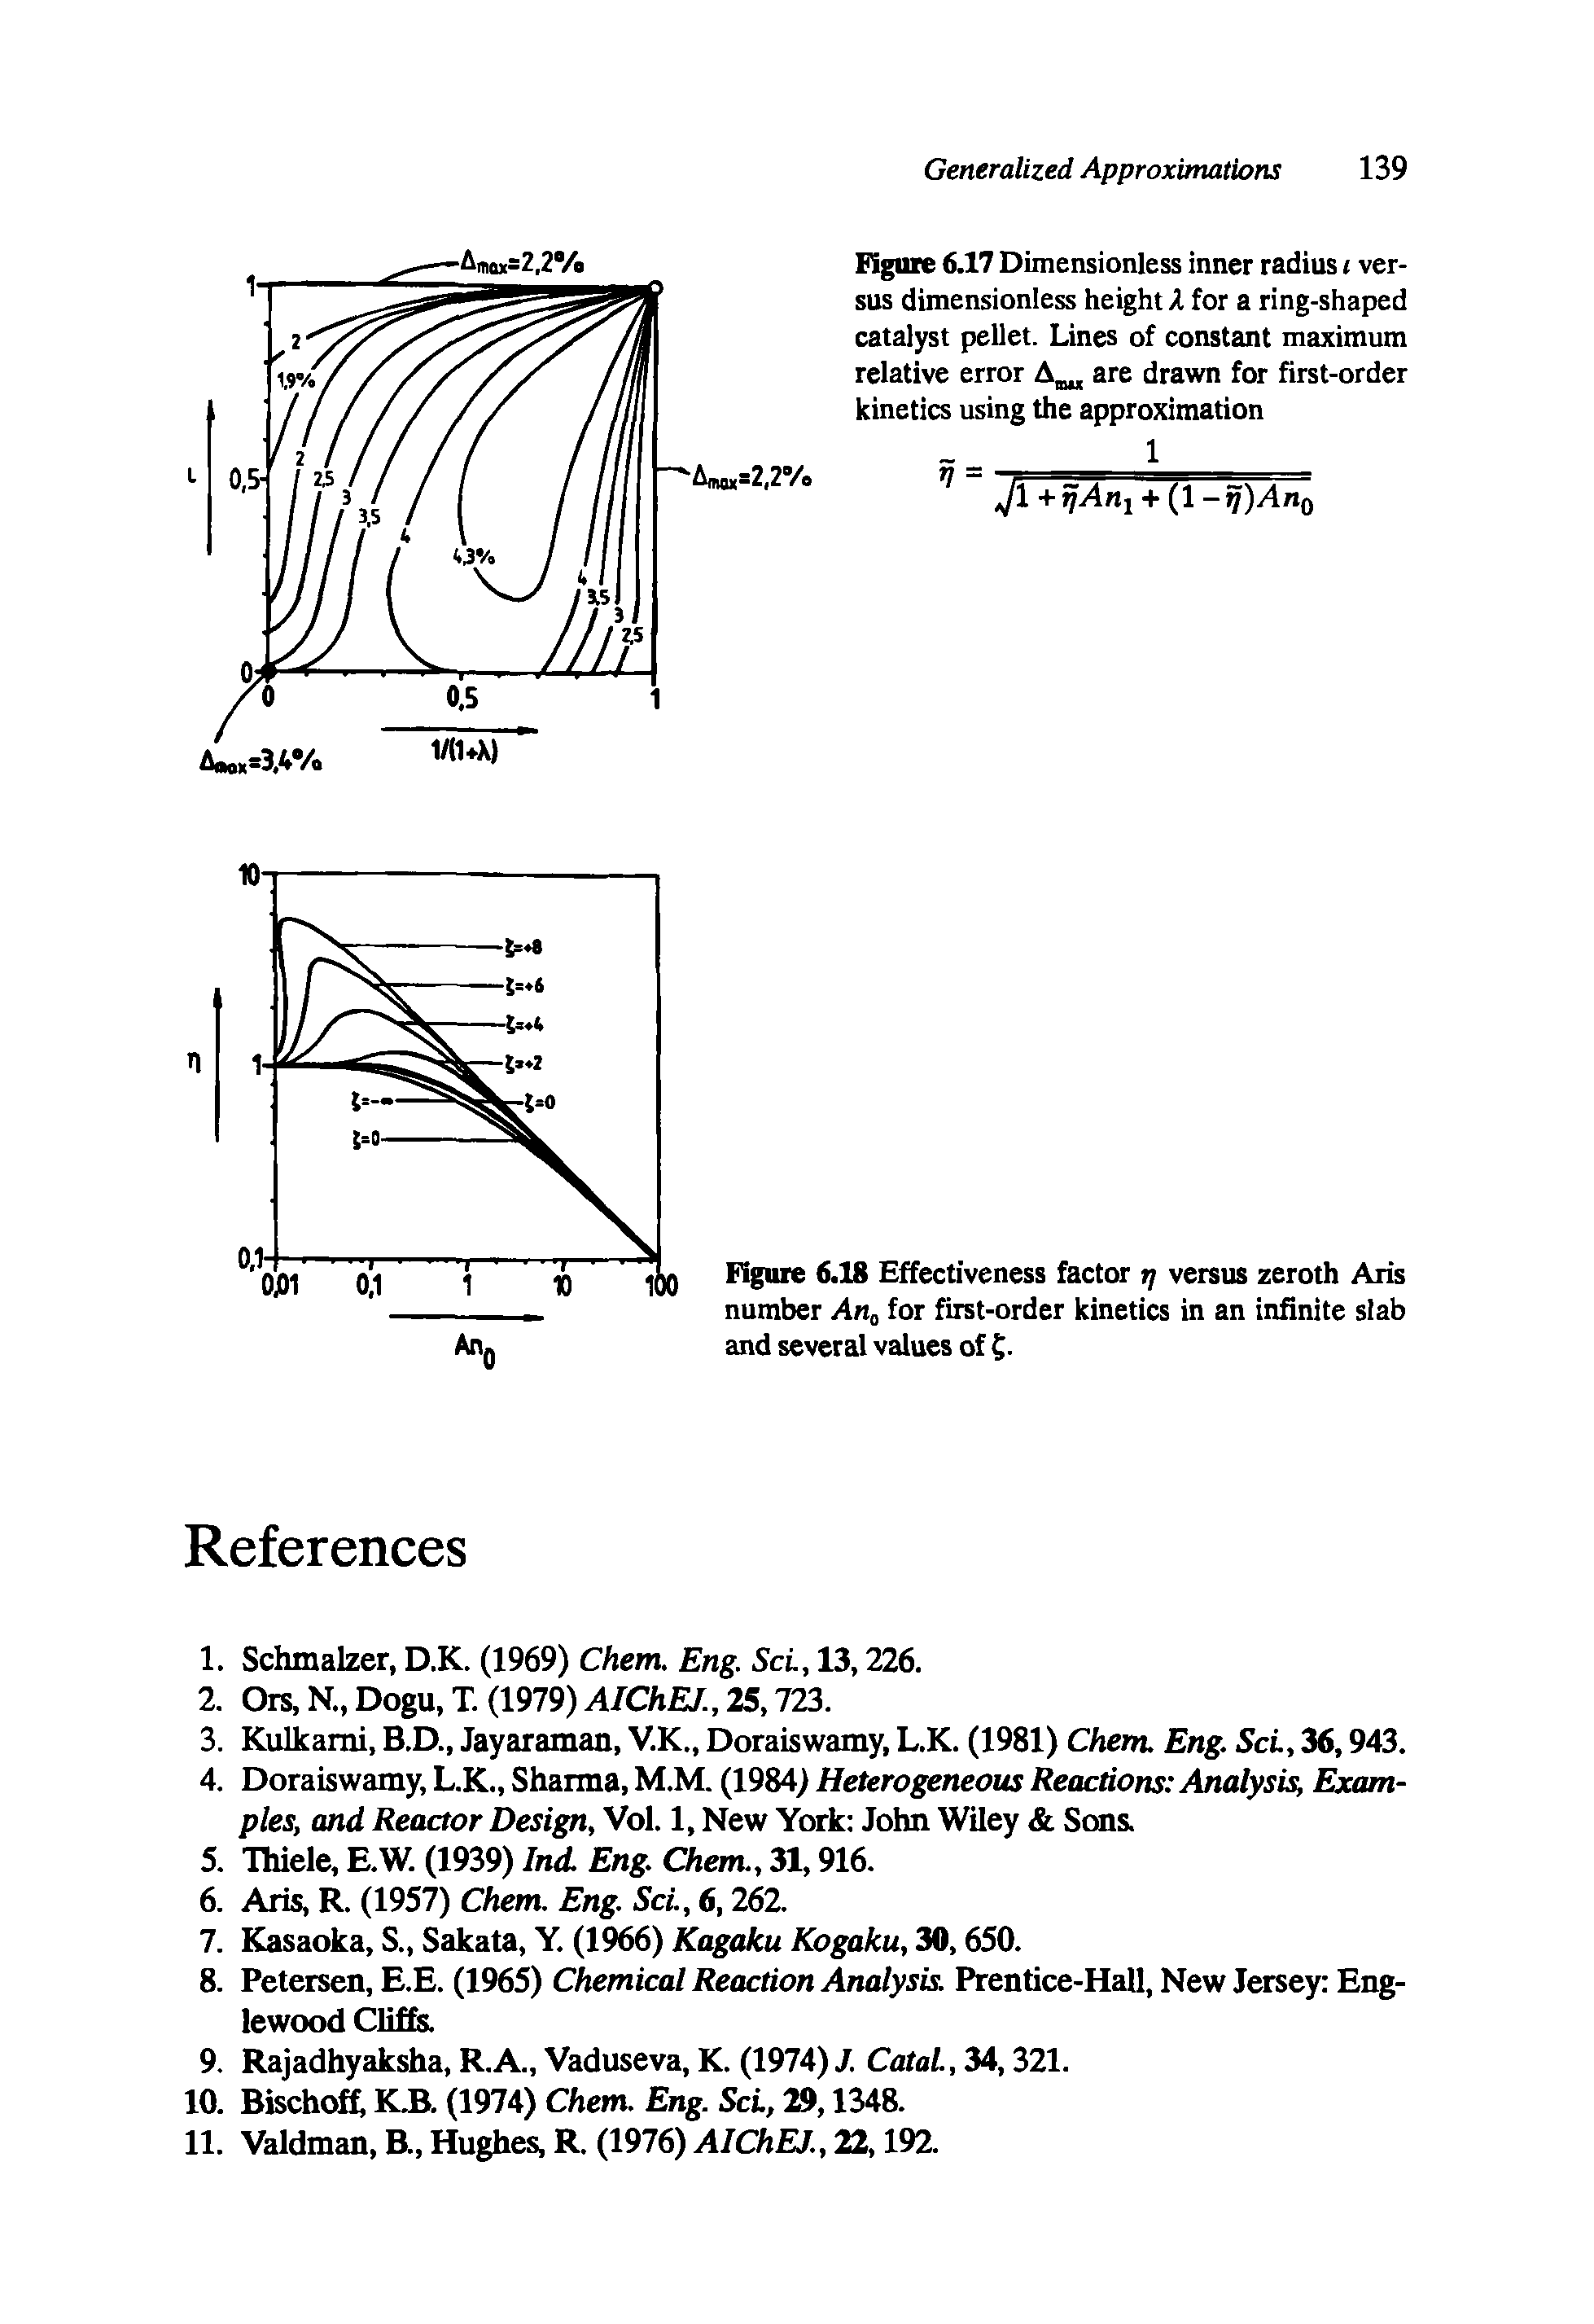 Figure 6.17 Dimensionless inner radius i versus dimensionless height X for a ring-shaped catalyst pellet. Lines of constant maximum relative error are drawn for first-order kinetics using the approximation 1...